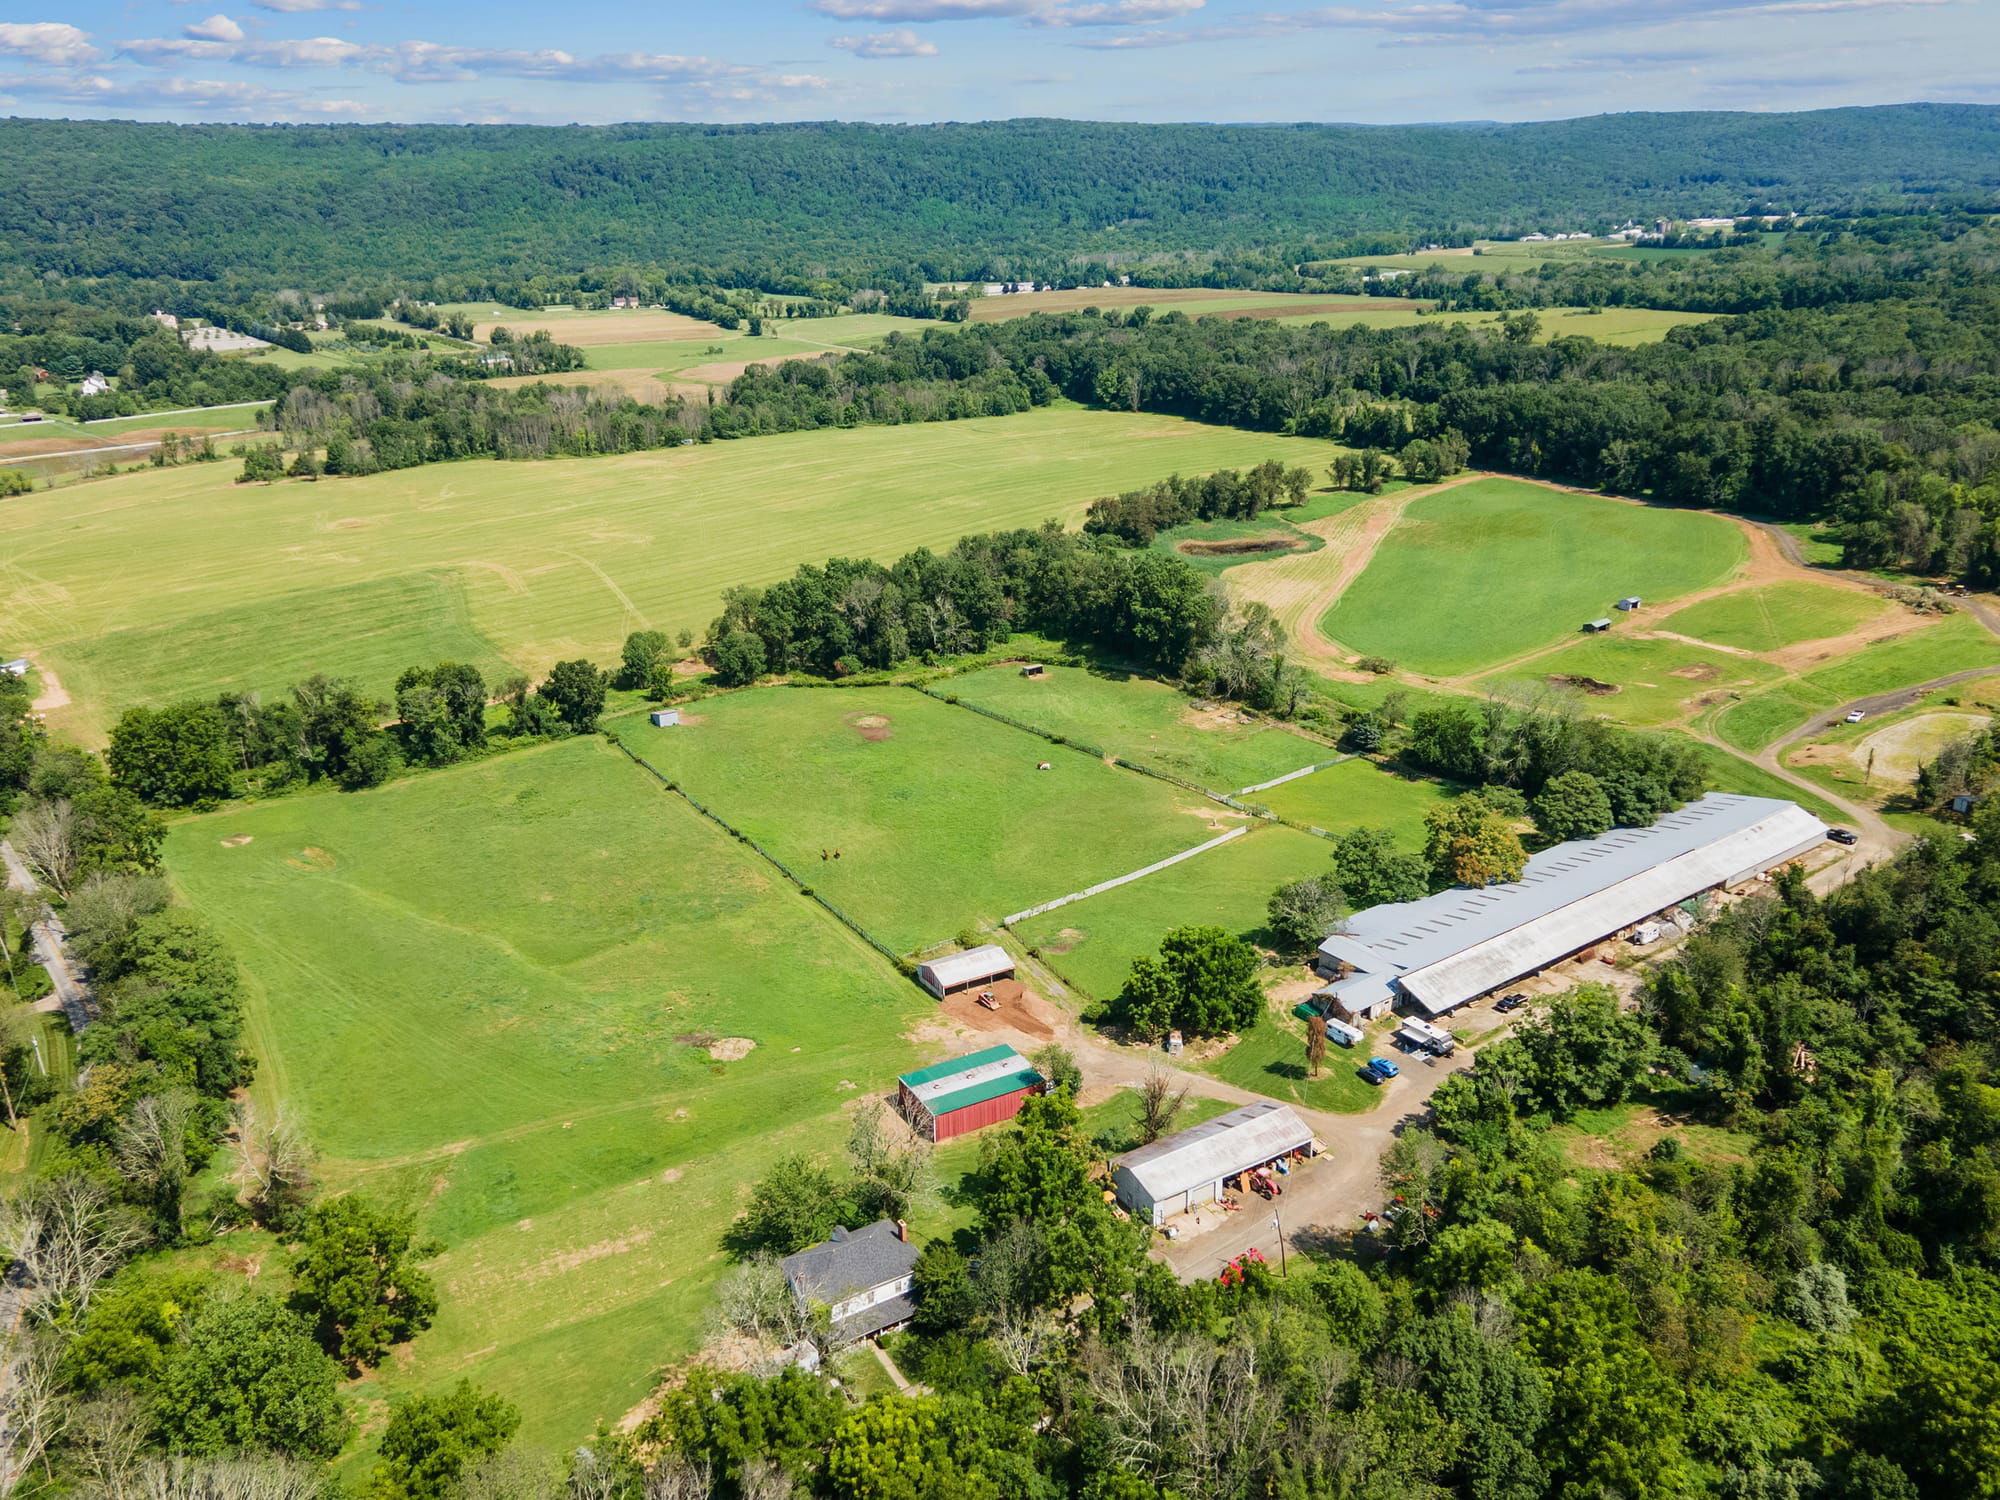 SOLD! 117 ACRE FARM IN LONG VALLEY  $1,440,000